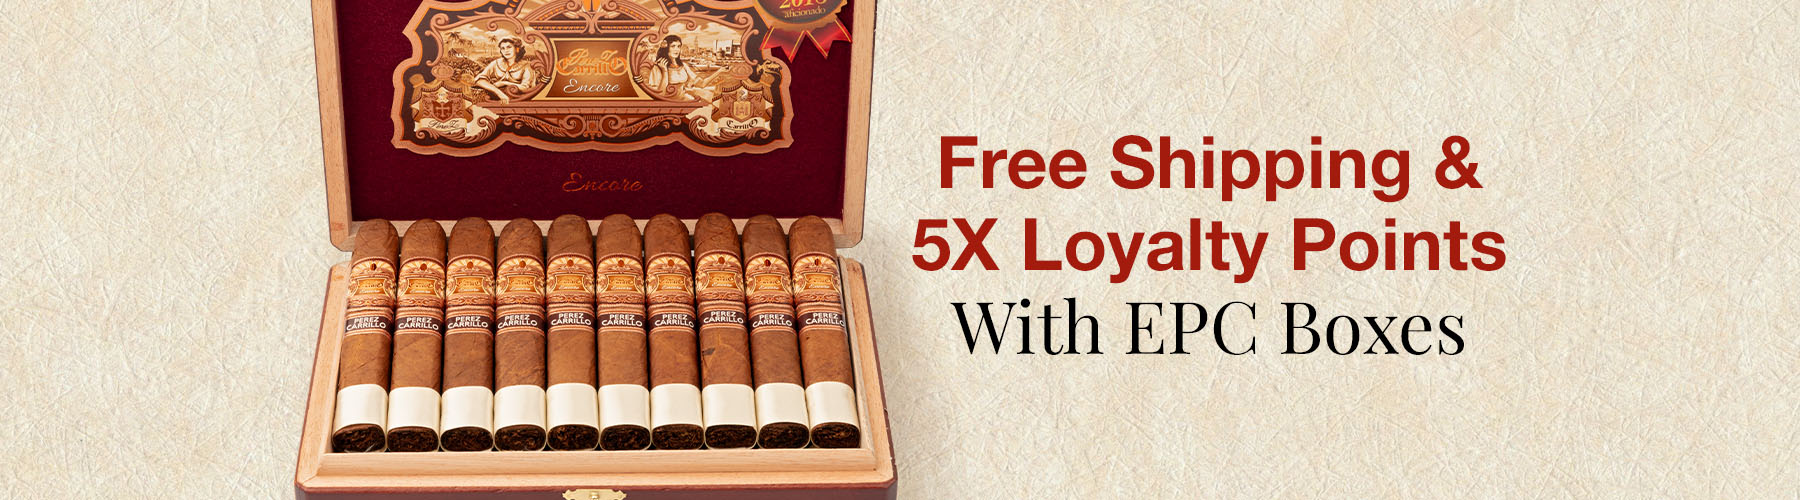 Free Shipping & 5X Loyalty Points with EPC boxes!